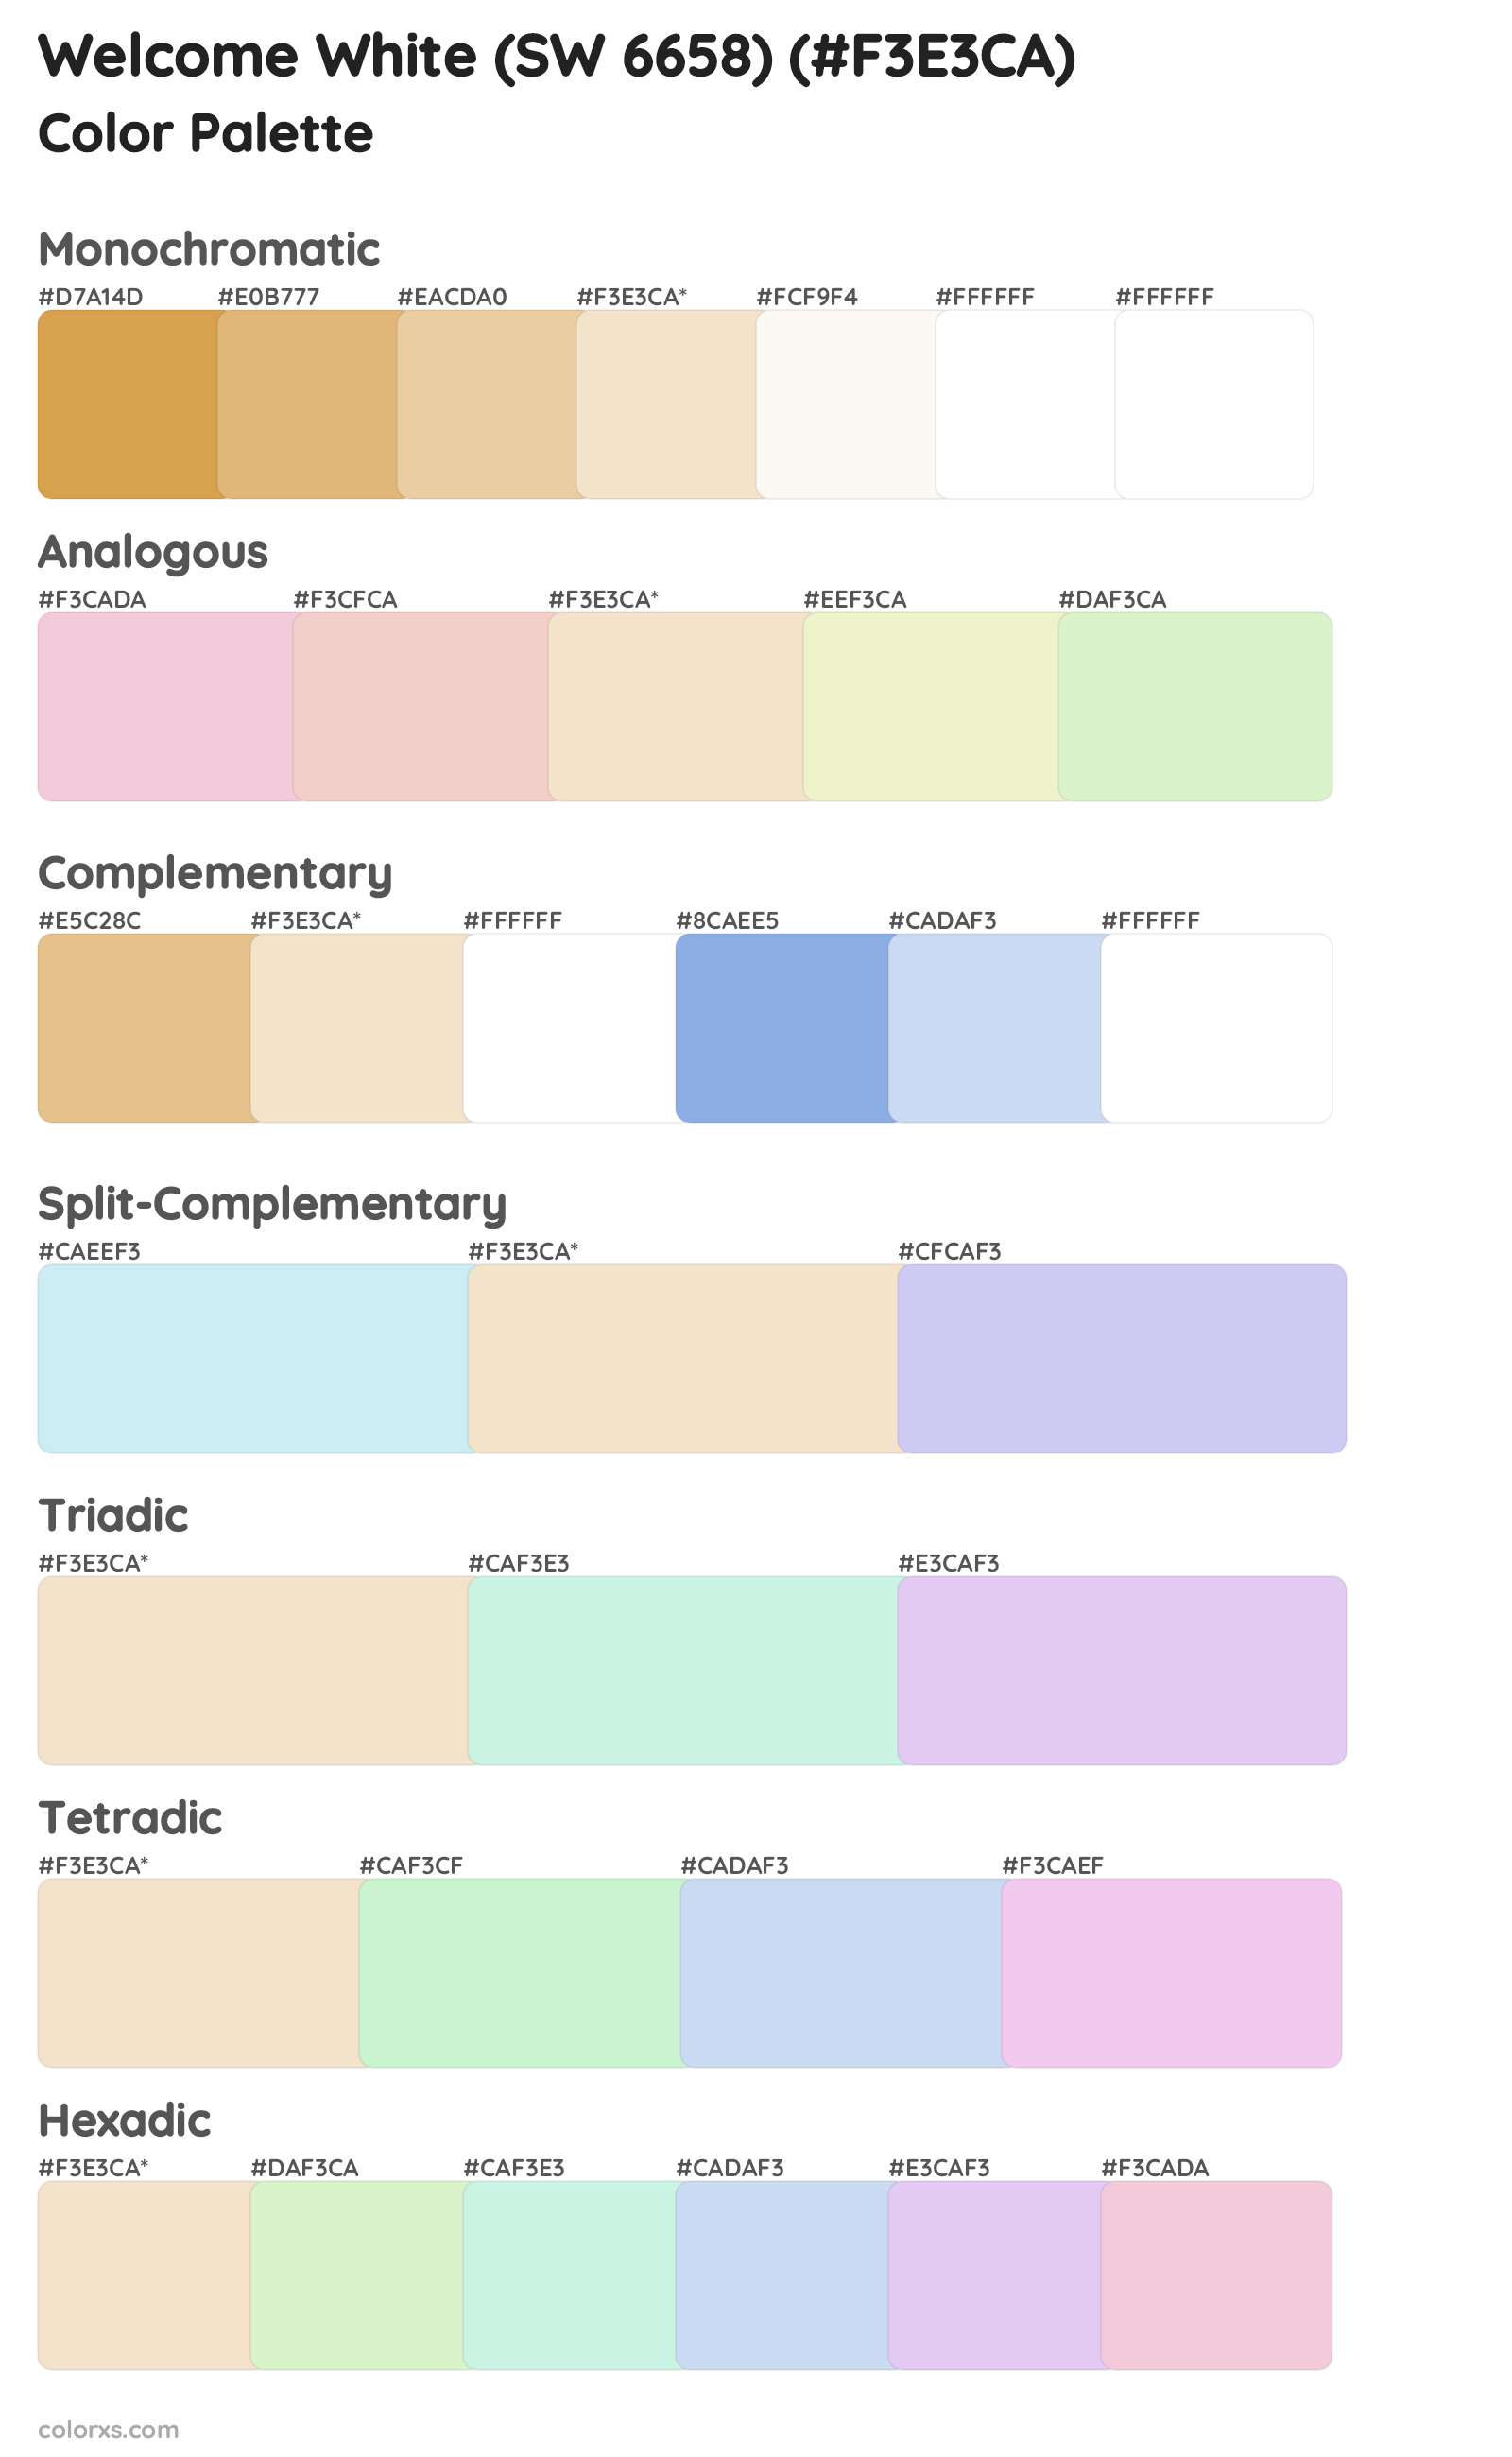 Welcome White (SW 6658) Color Scheme Palettes